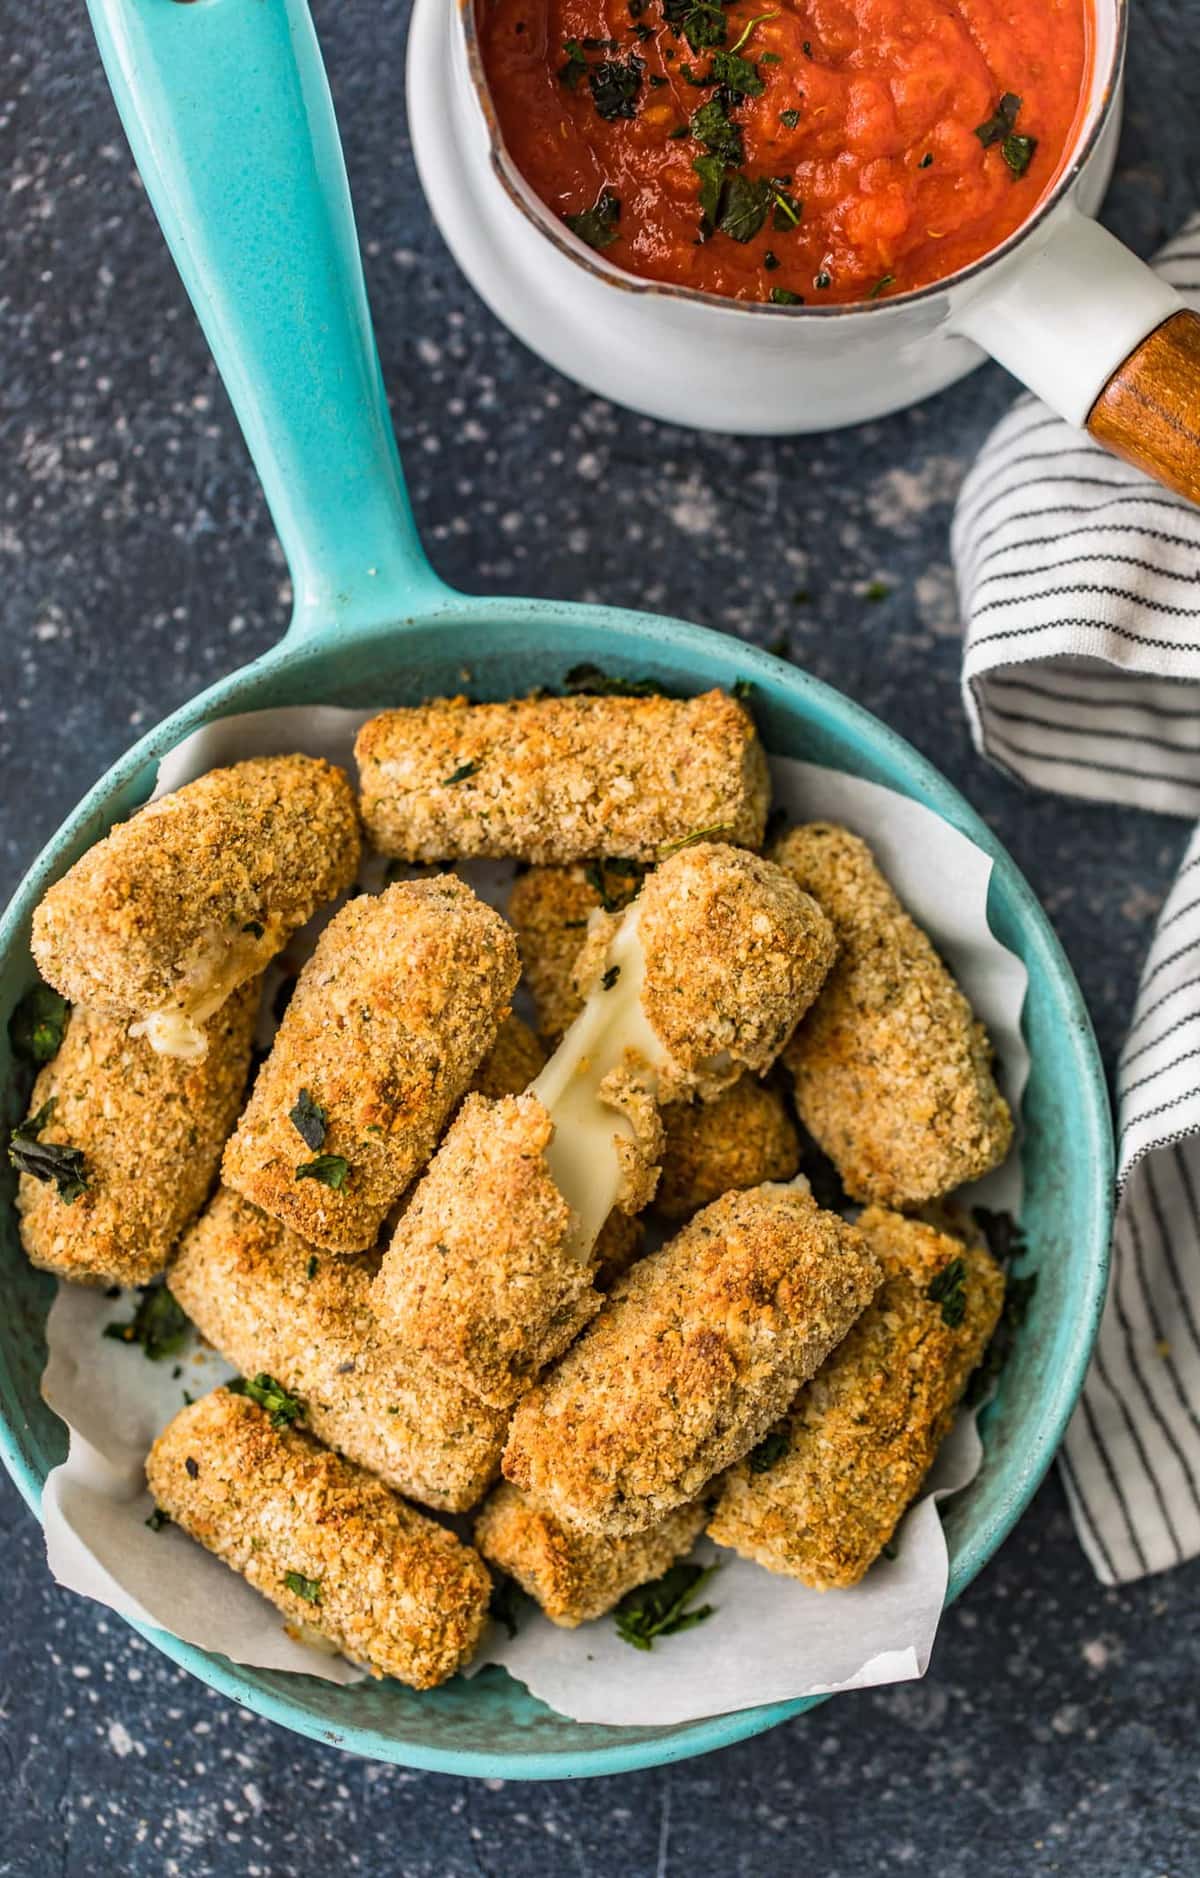 Top shot of baked mozzarella cheese sticks ready to be served